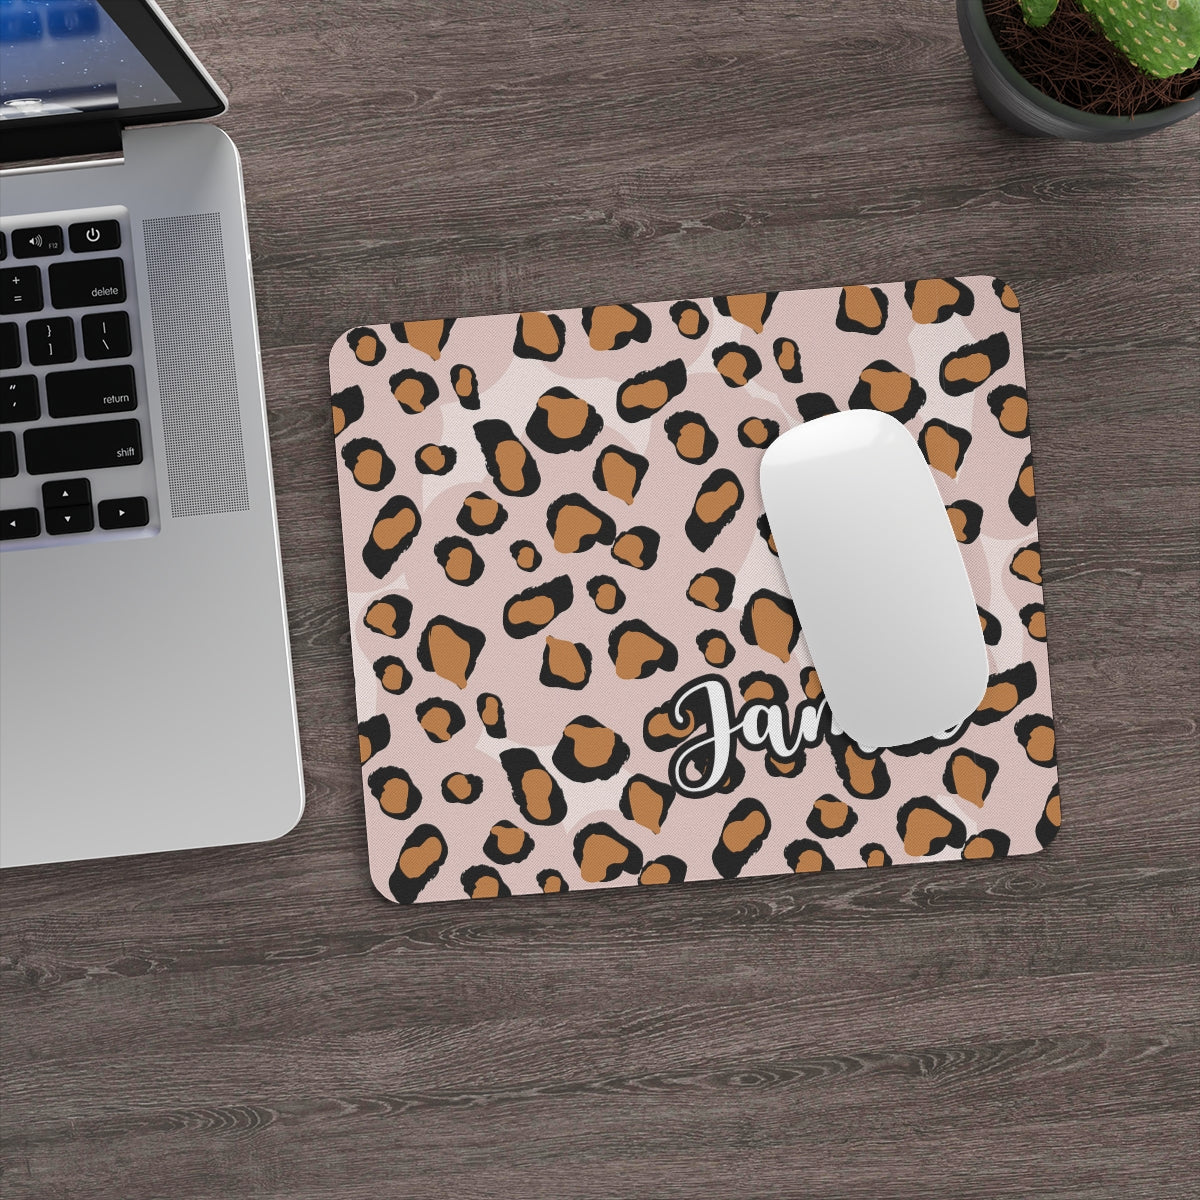 Personalized Pink Leopard Print Mouse Pad